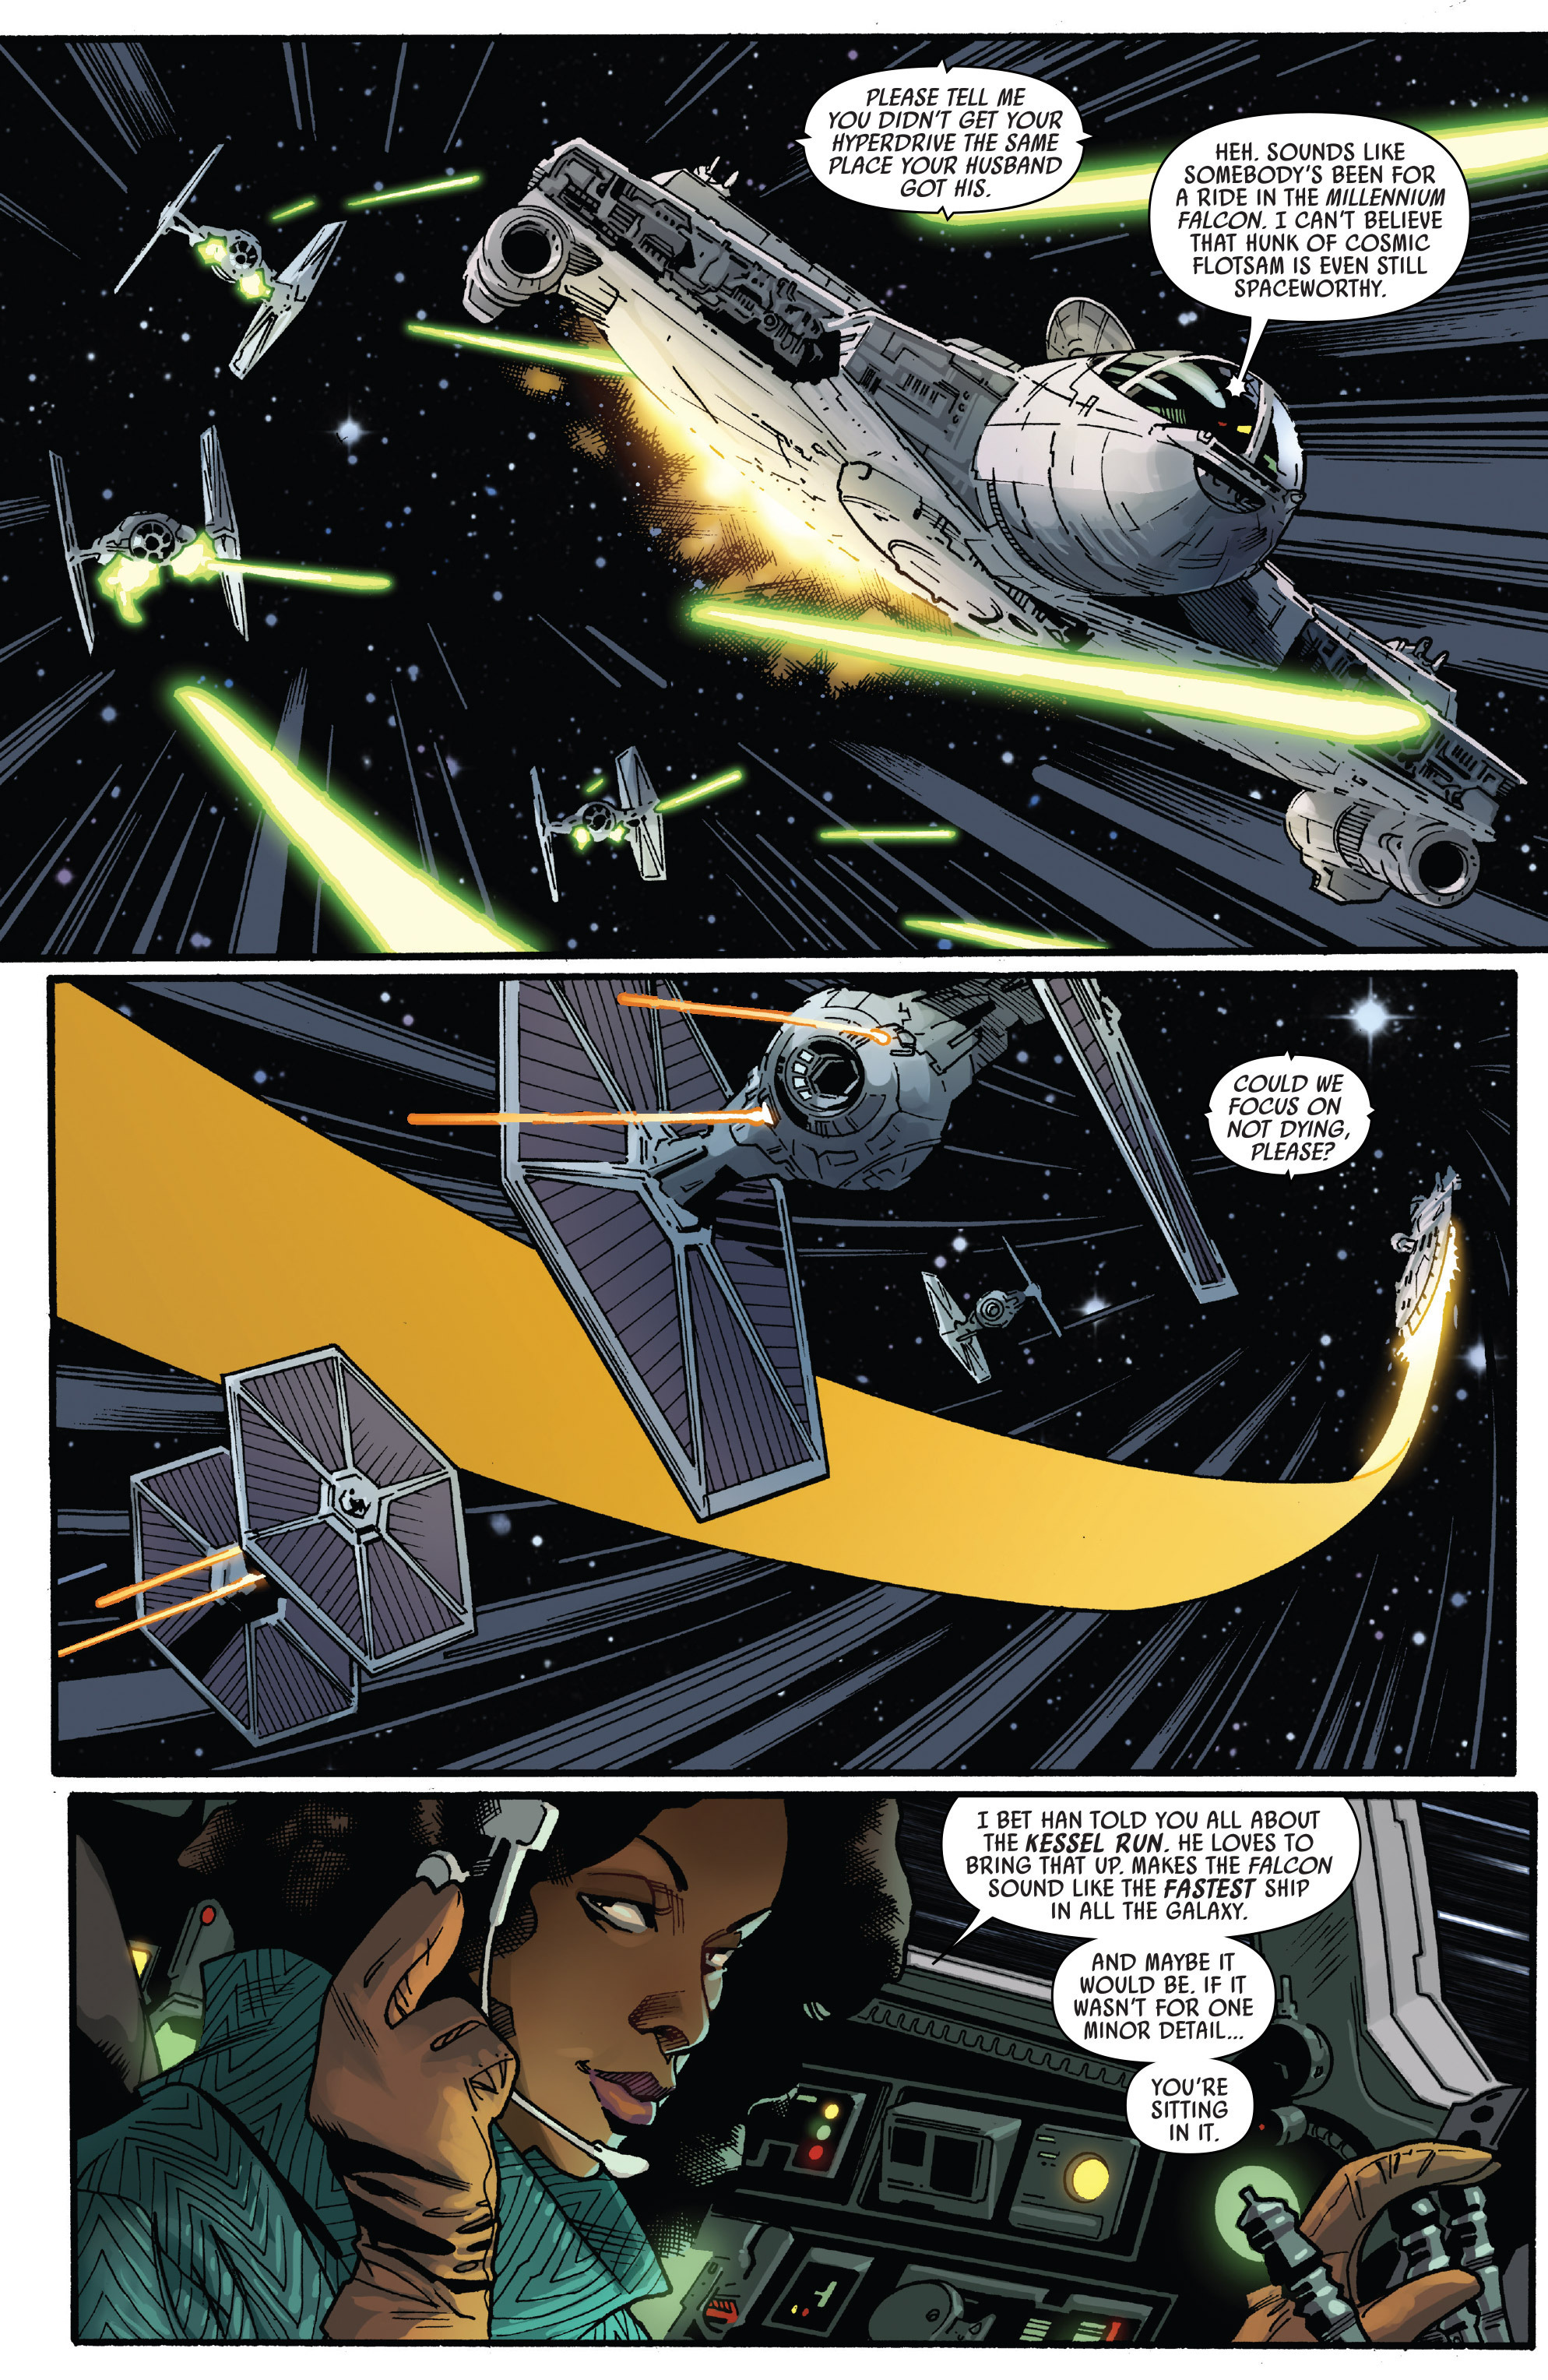 Star Wars (2015) issue 10 - Page 4